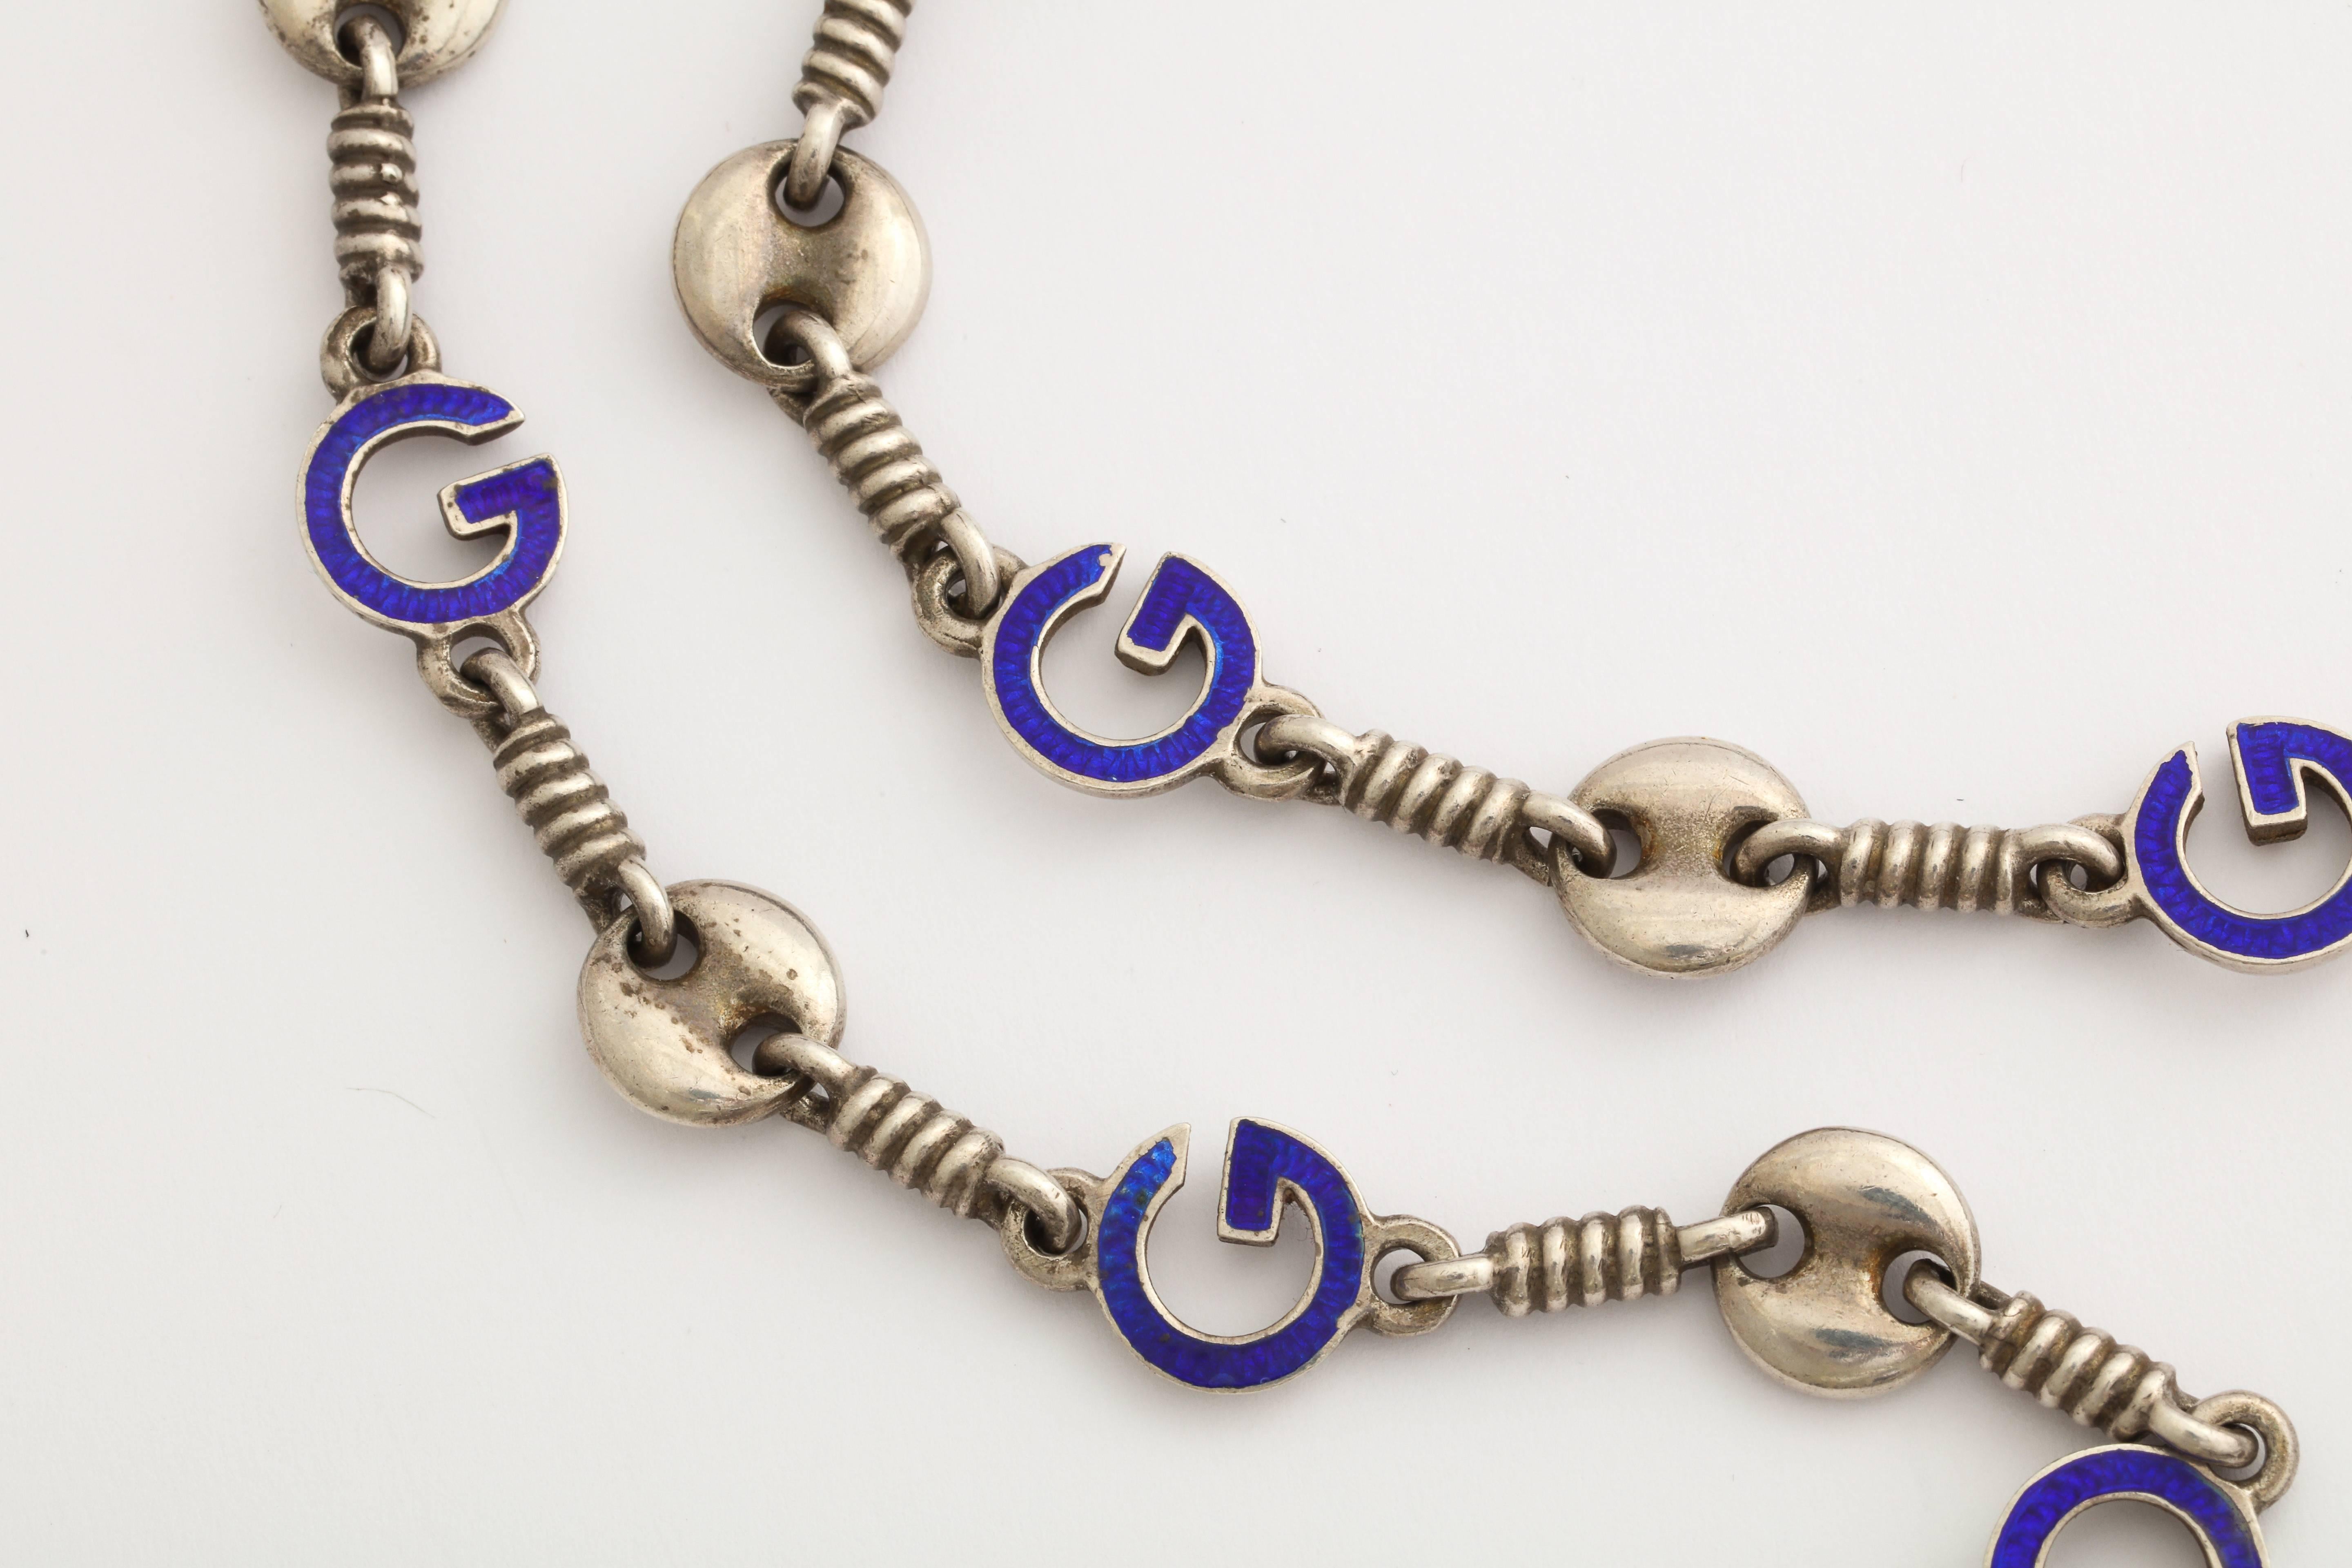 Think of Jetsetter's and Studio 54, while wearing this long chic 1970s Gucci chain of sterling silver, featuring blue enameled 